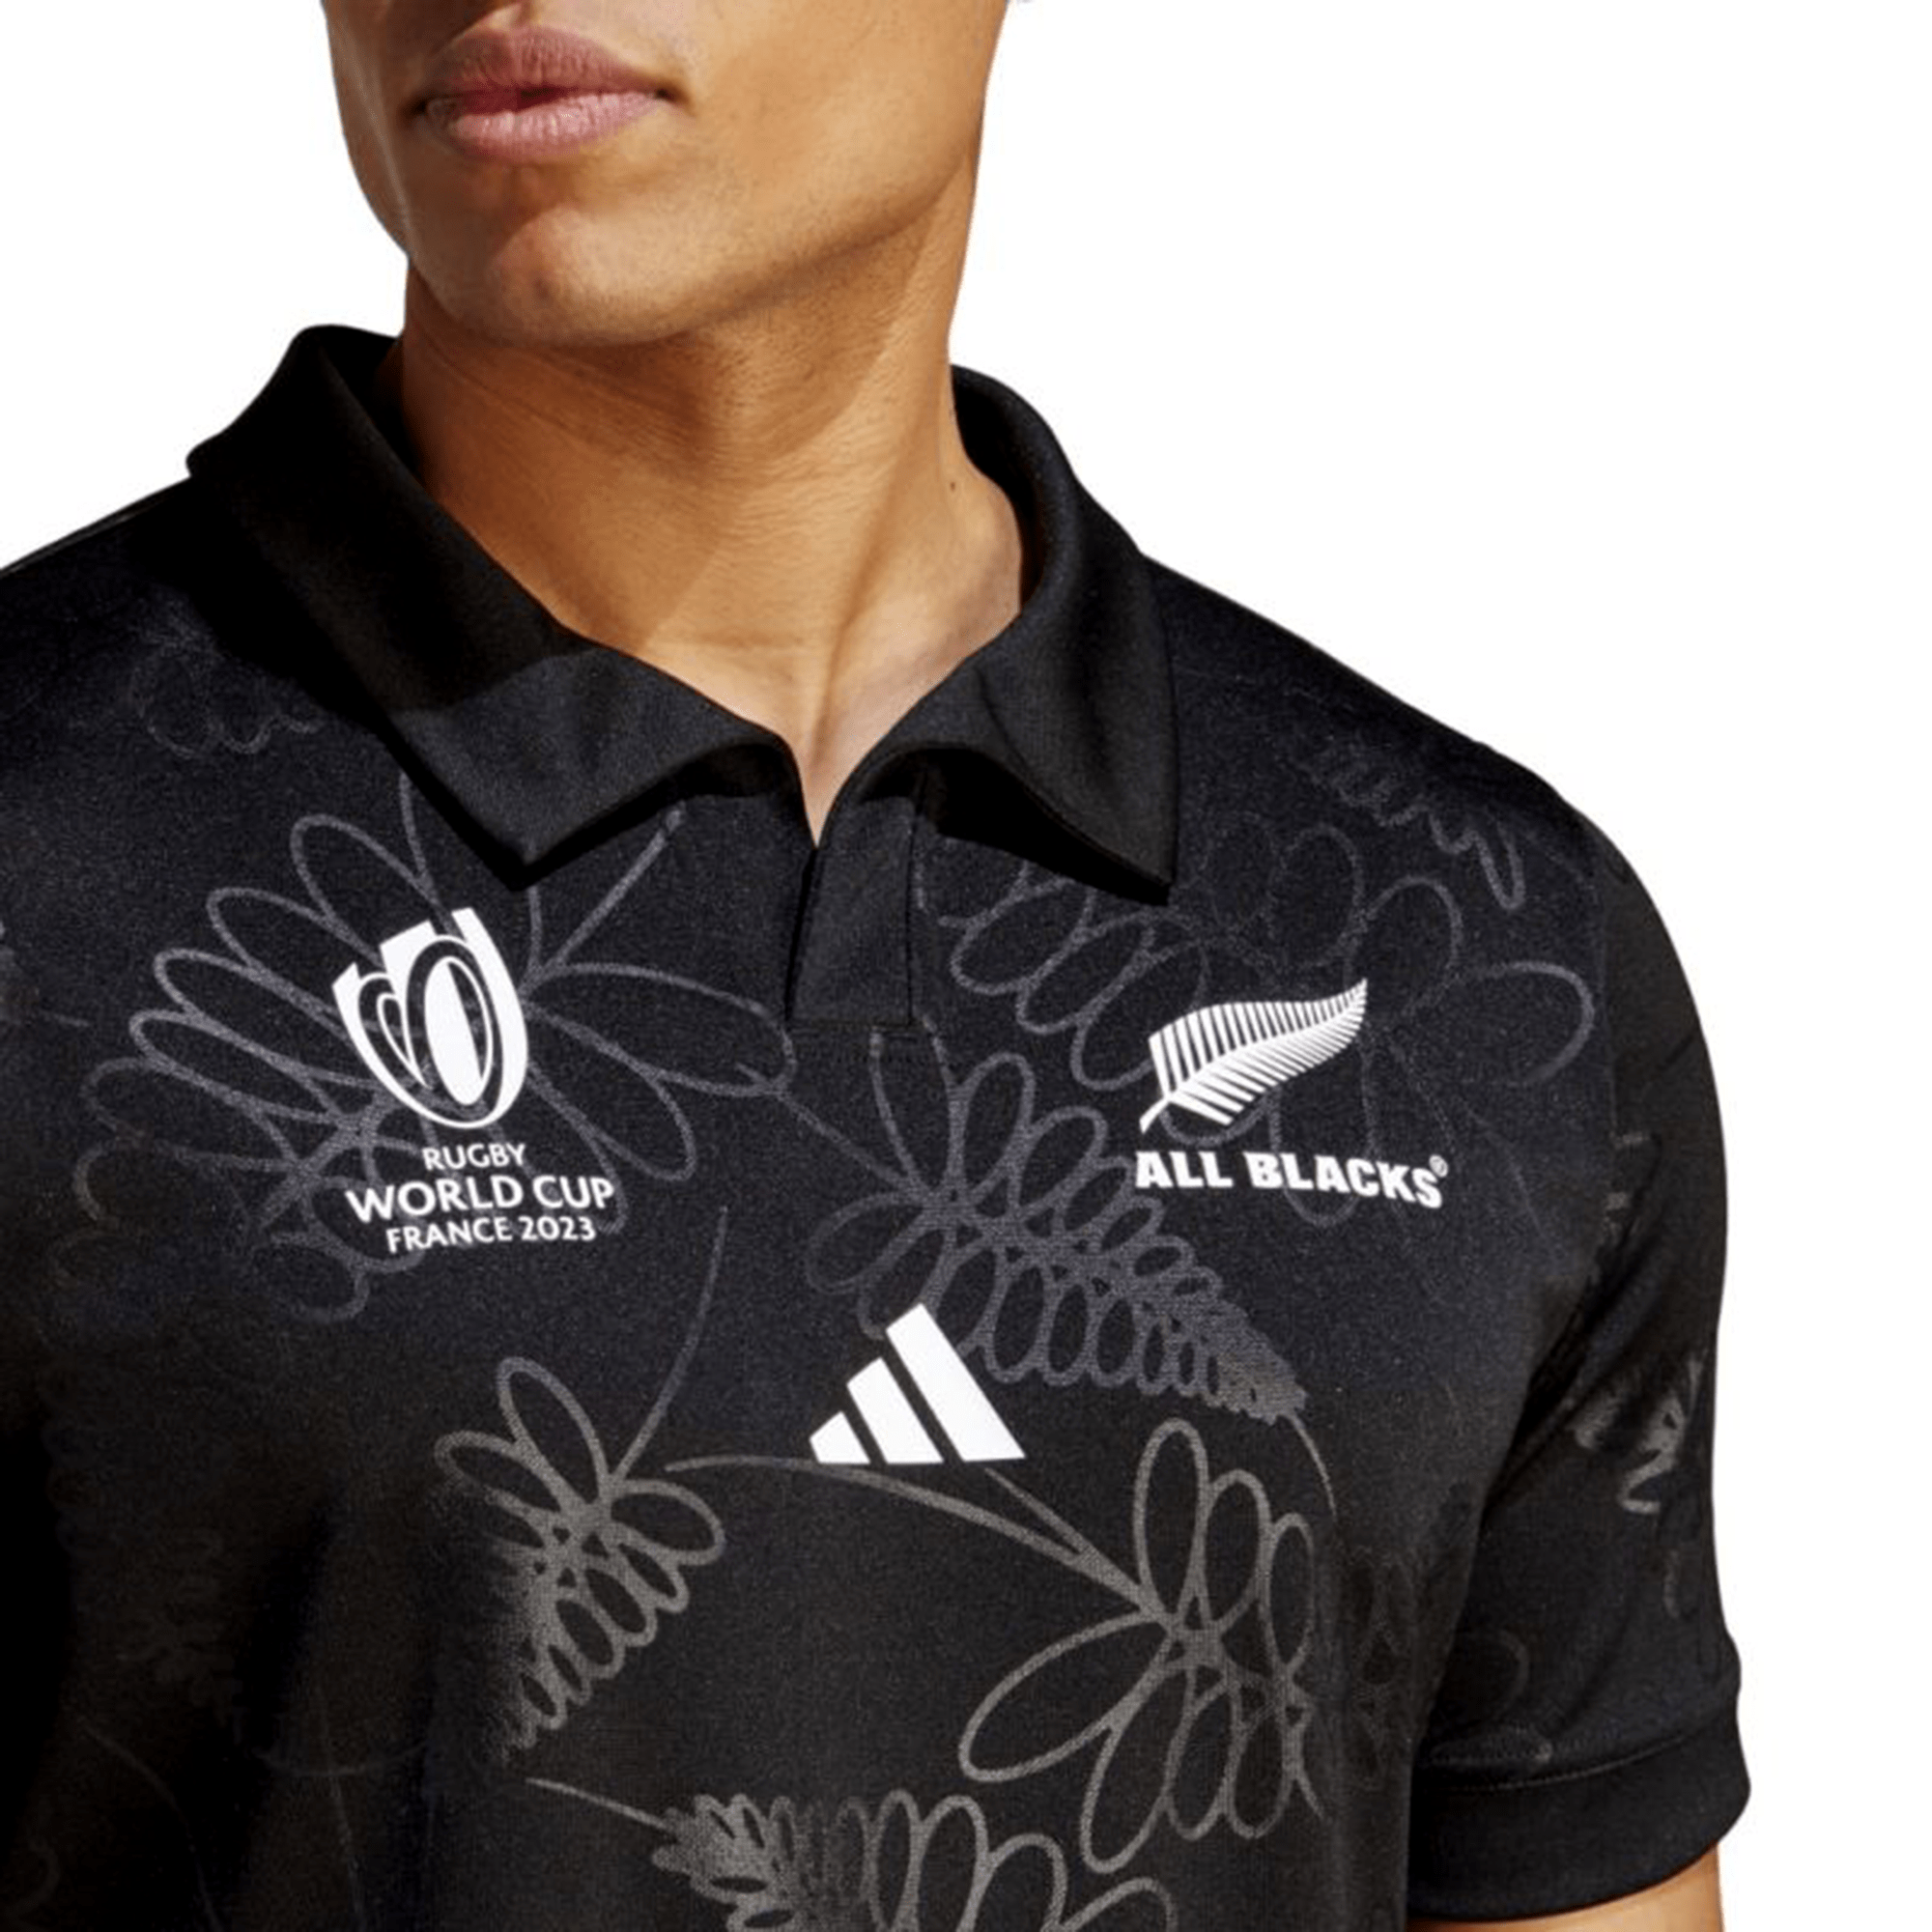 New Zealand All Blacks RWC 23 Home Supporter Jersey by adidas